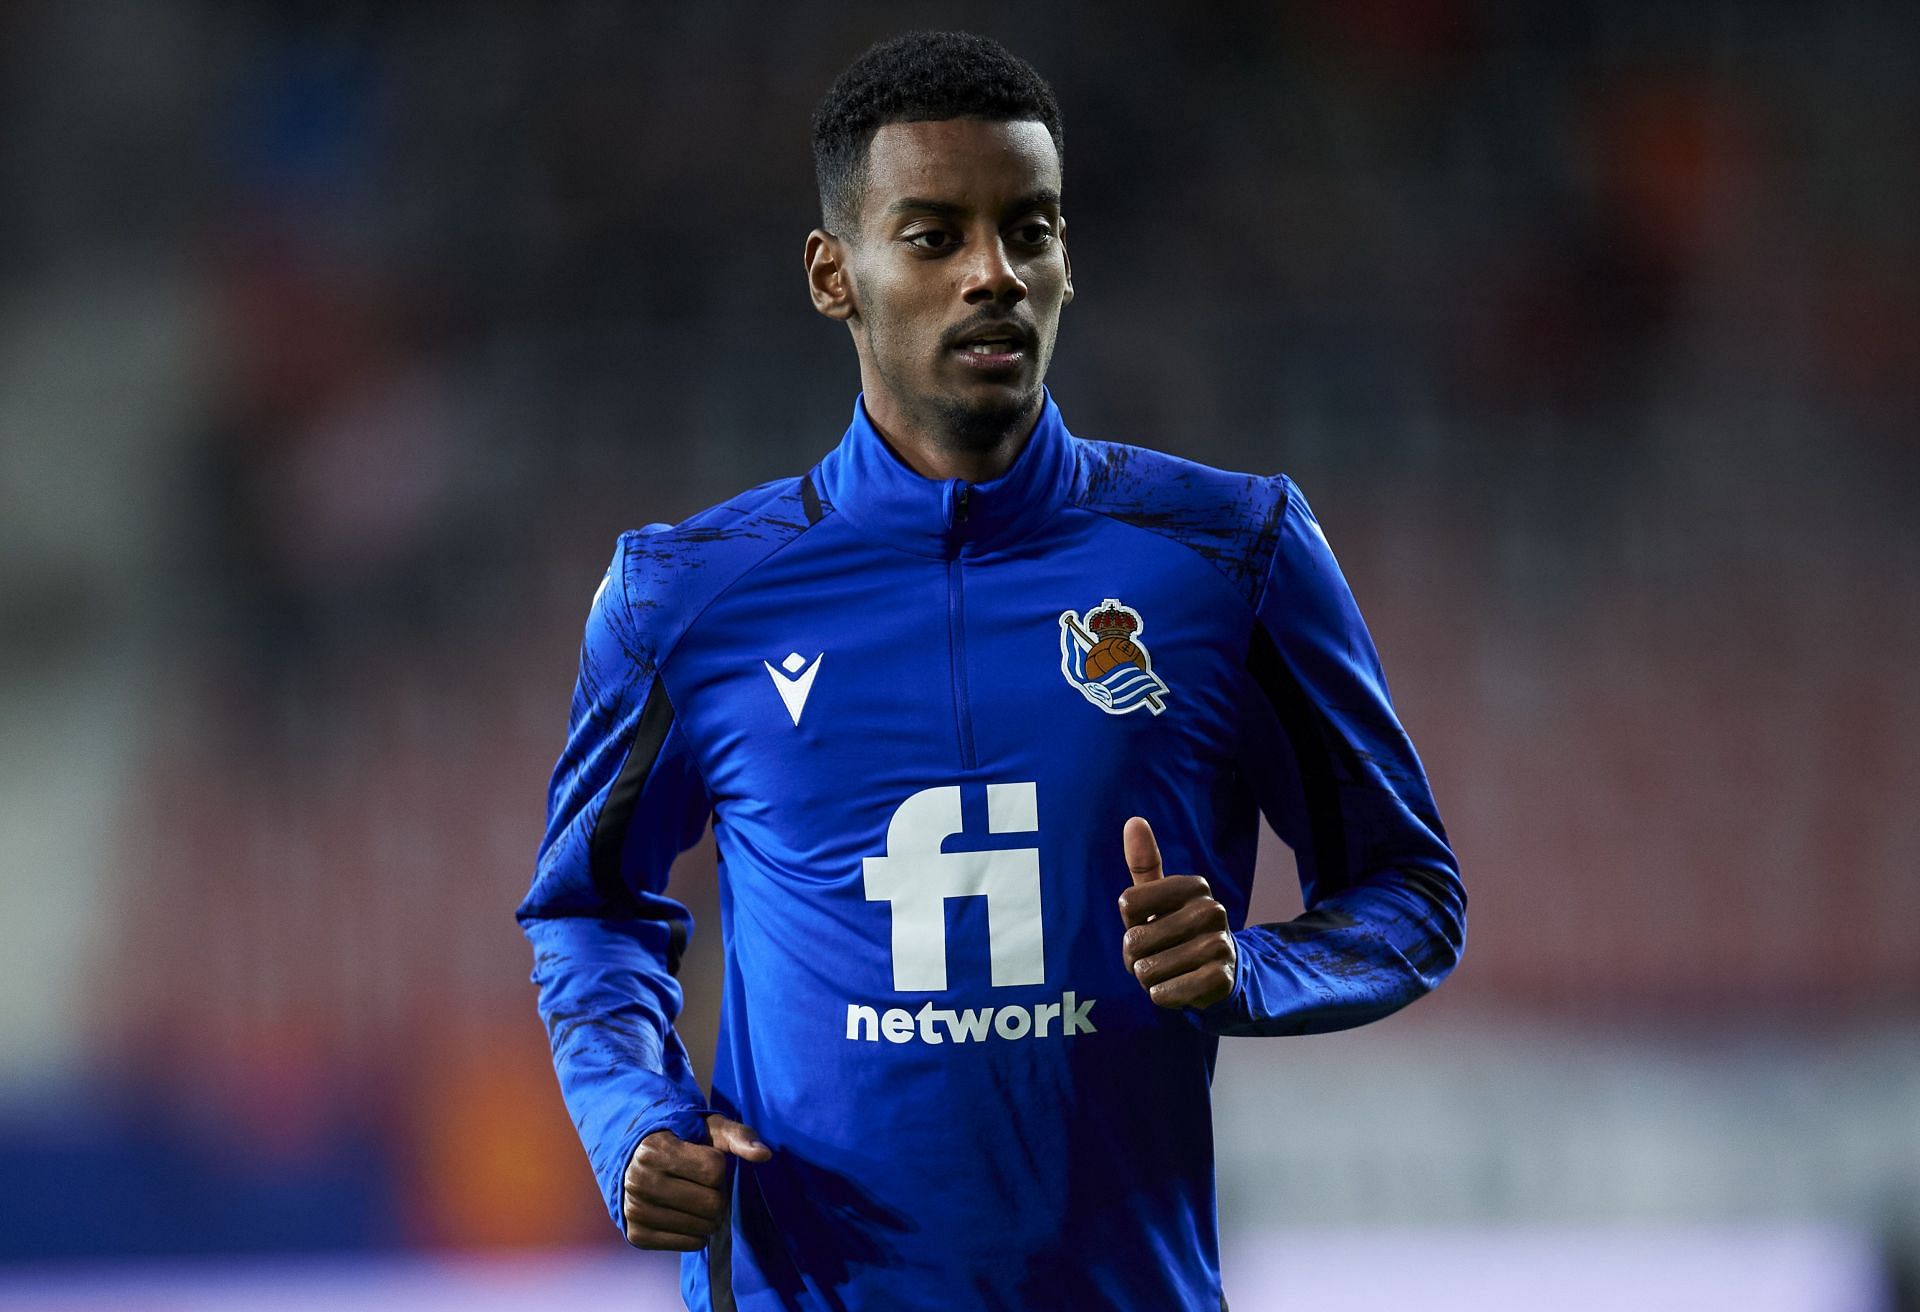 Alexander Isak has been a wonderful performer in La Liga and could be a Premier League star at Tottenham.